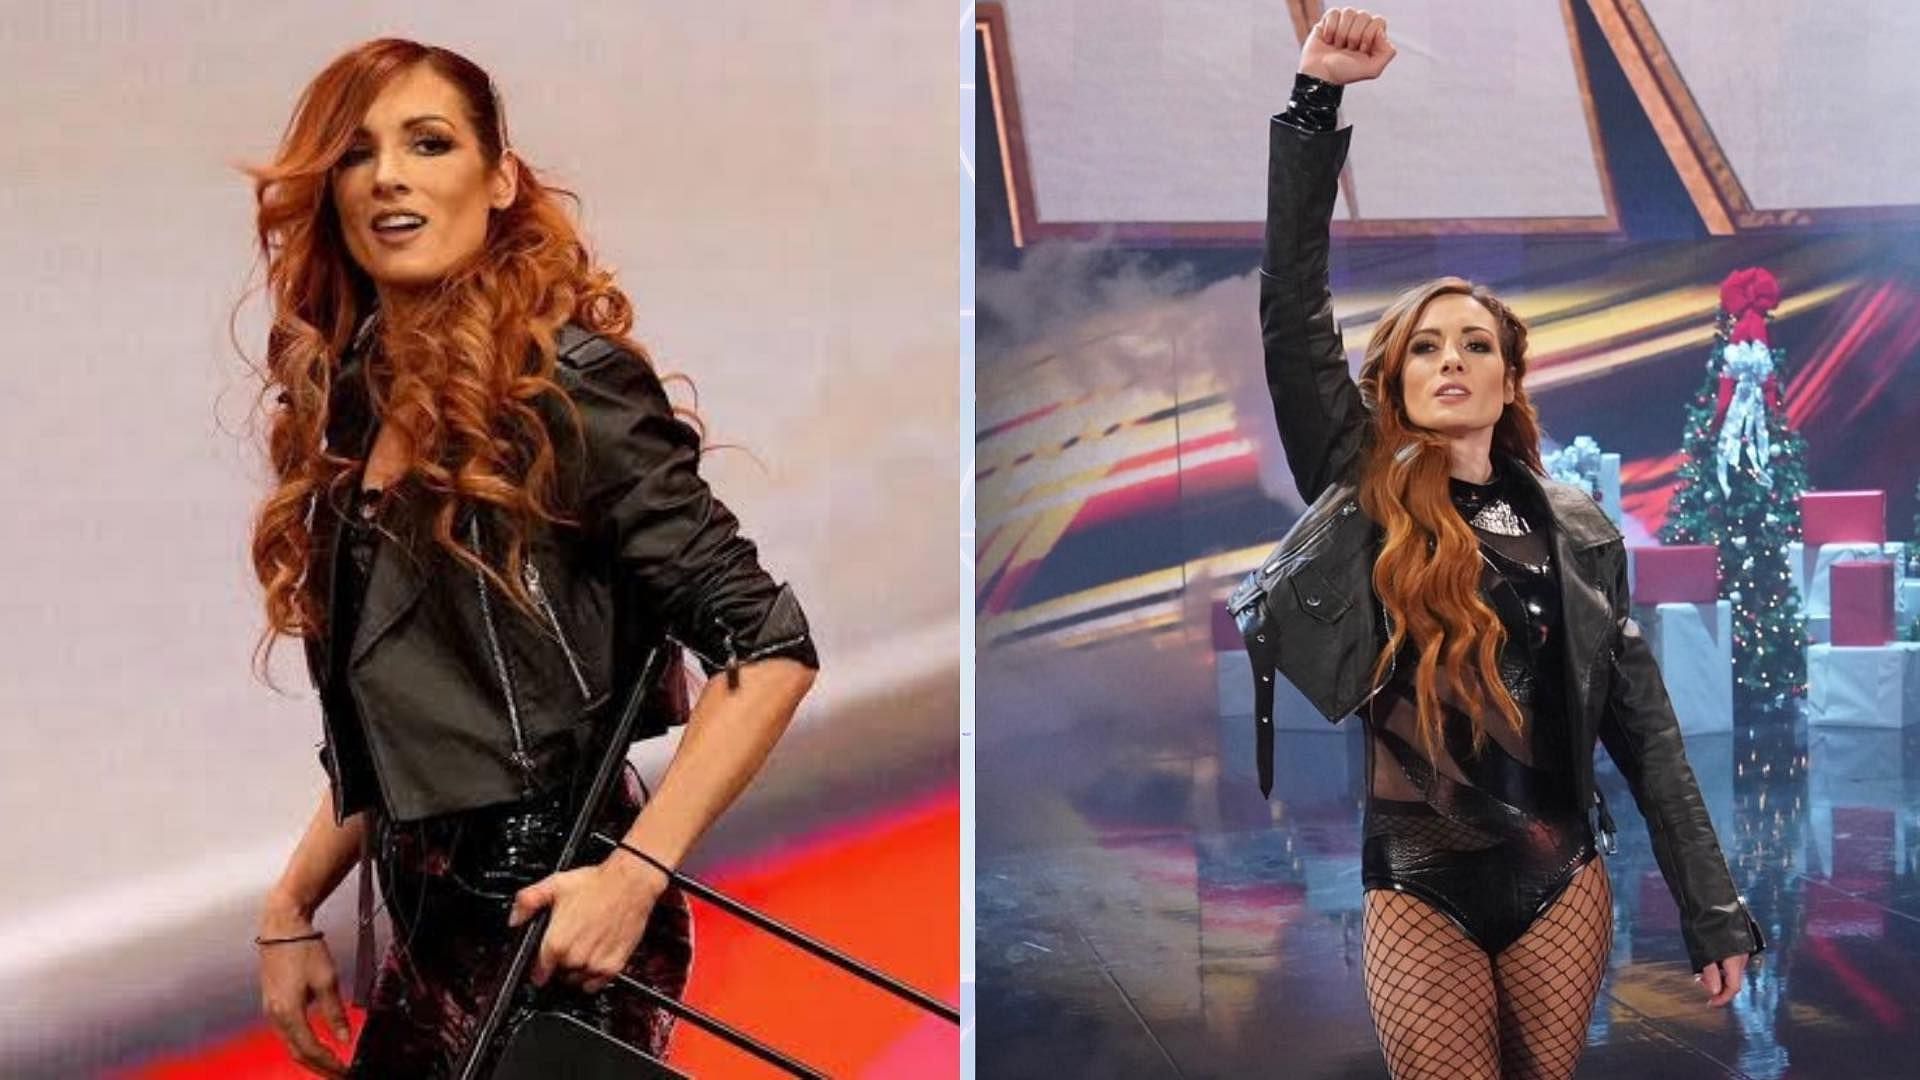 WWE Superstar Becky Lynch has a lot more things to do in WWE.